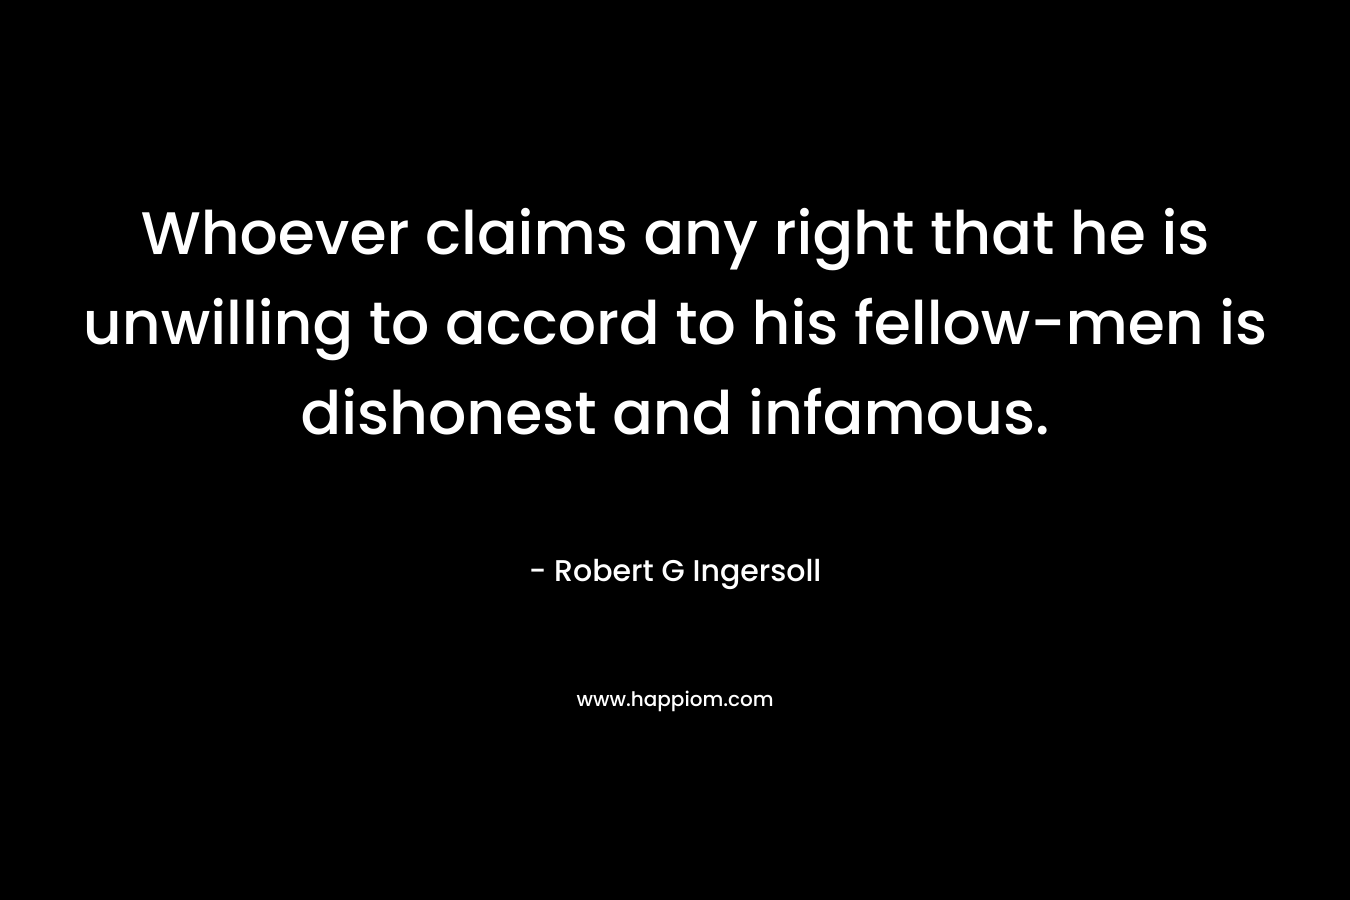 Whoever claims any right that he is unwilling to accord to his fellow-men is dishonest and infamous. – Robert G Ingersoll